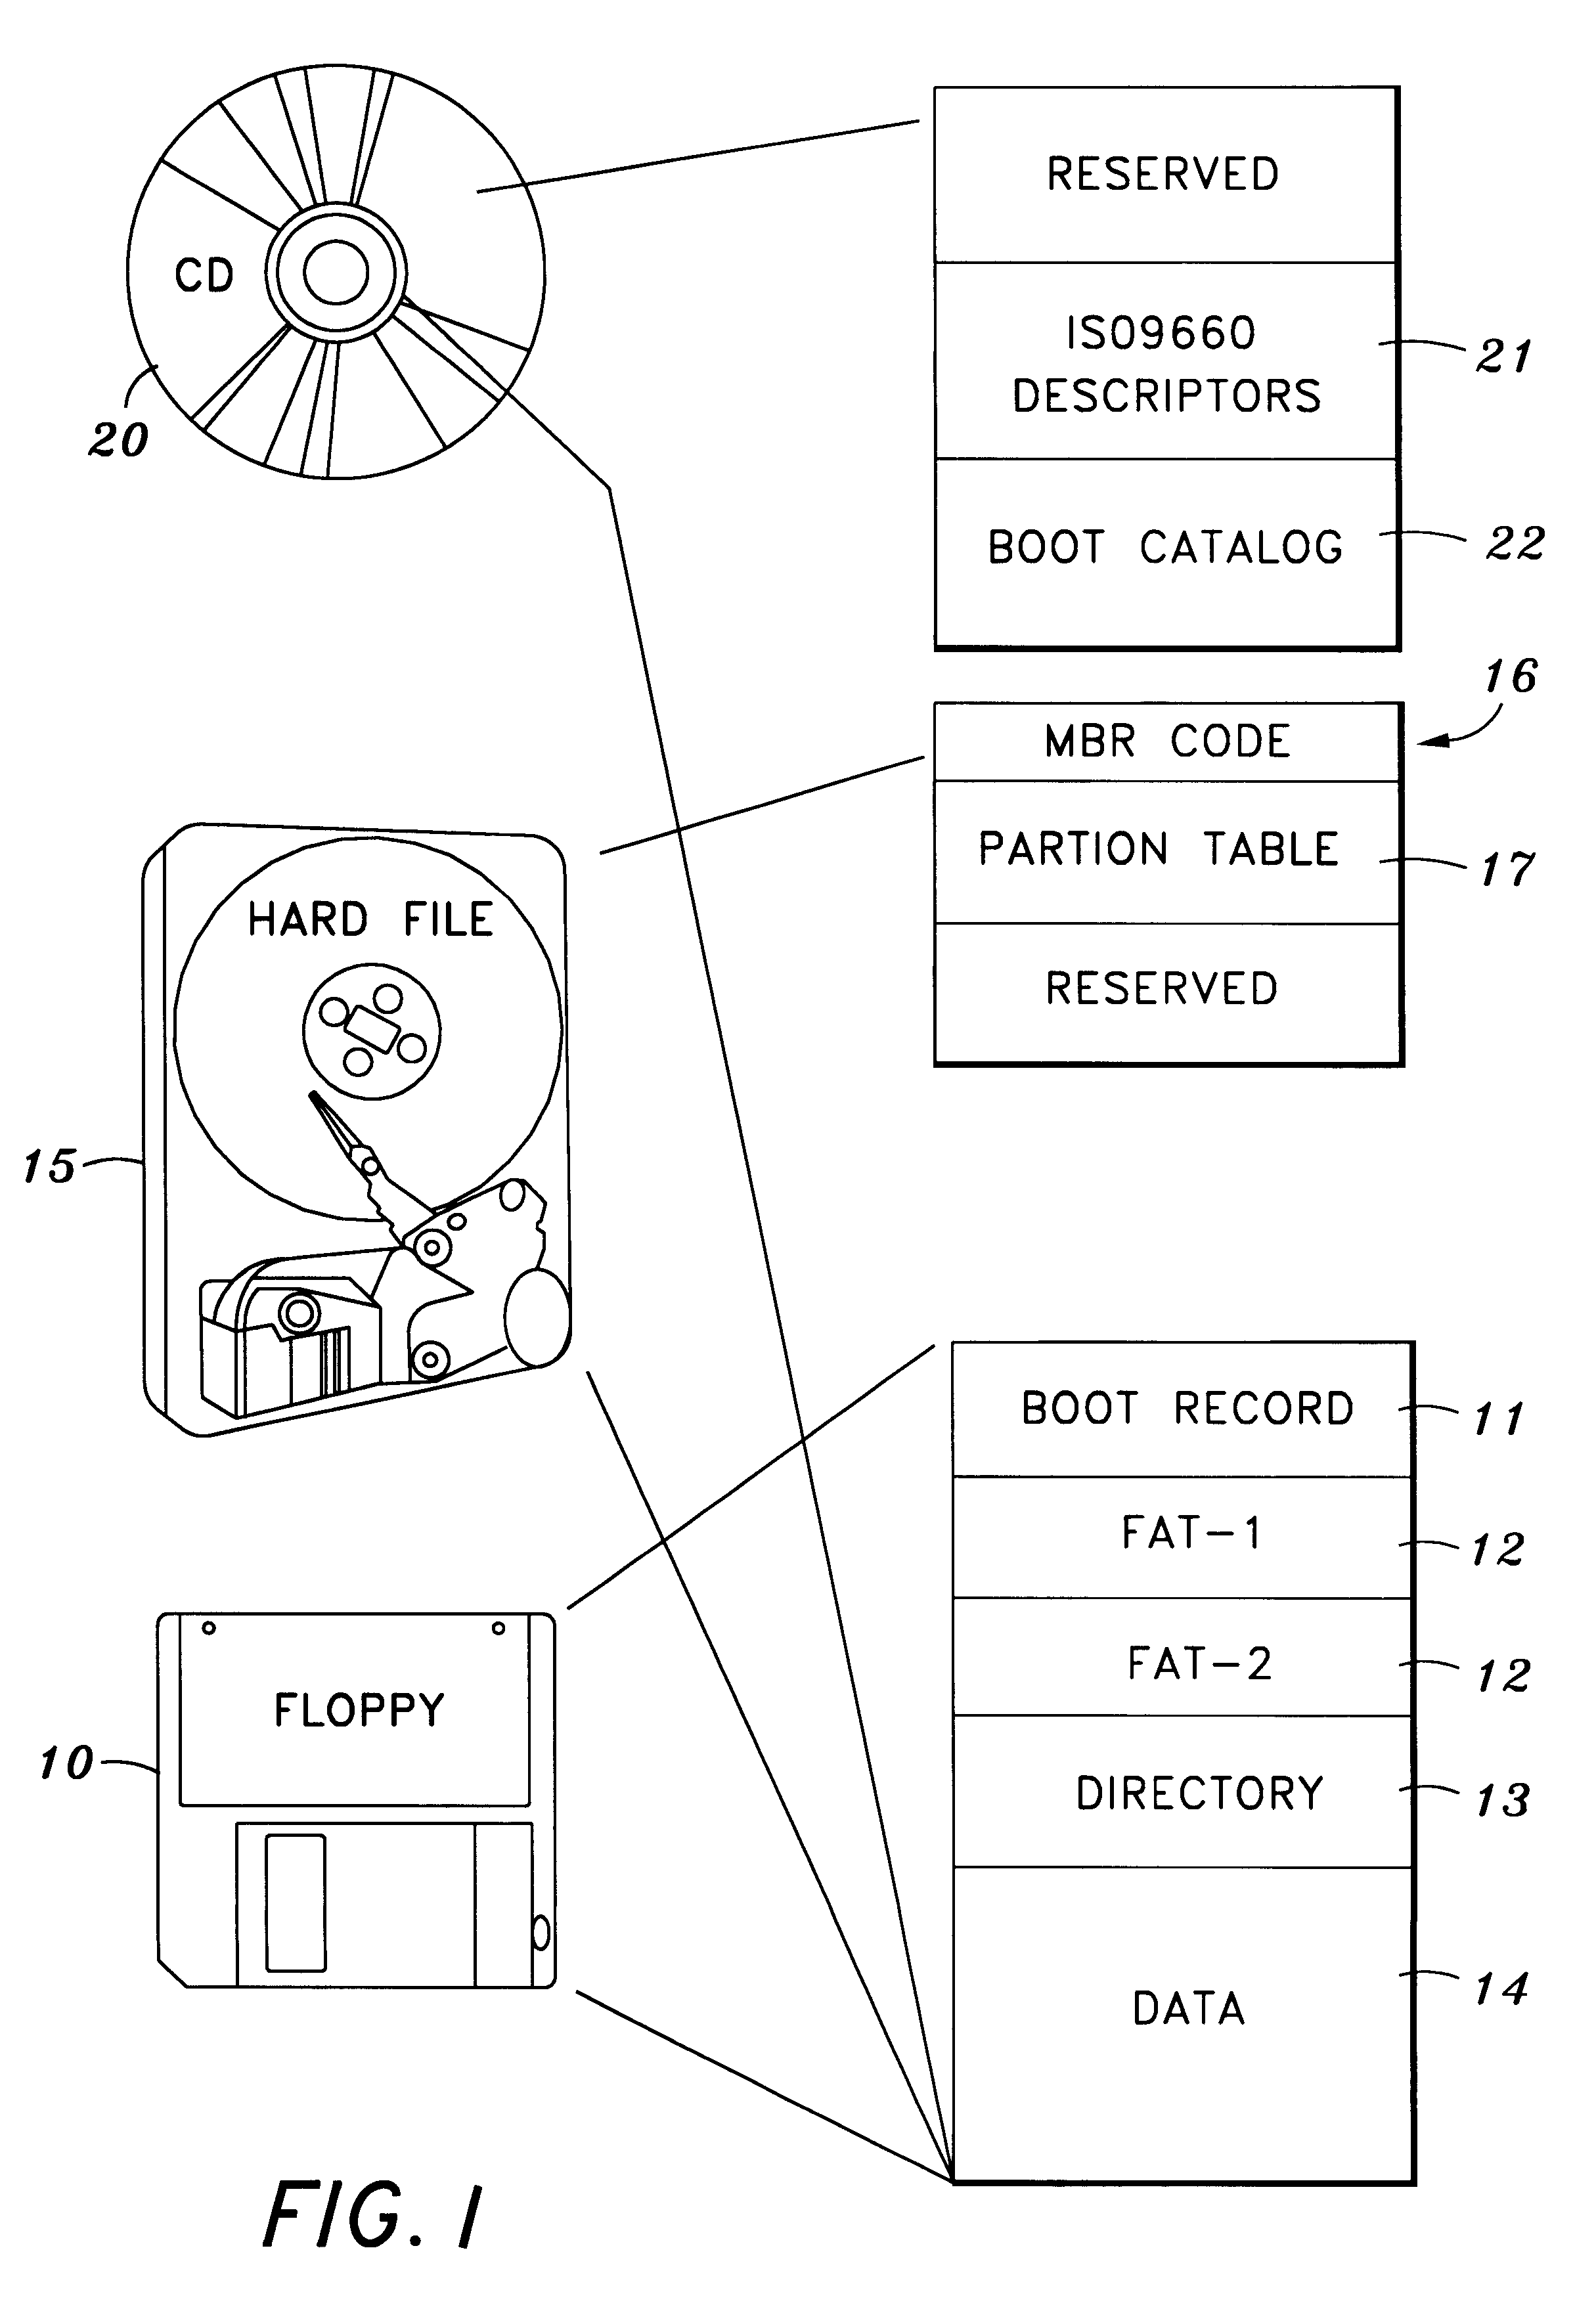 Method and device for booting a CD-ROM from a single disk image having multiple emulations